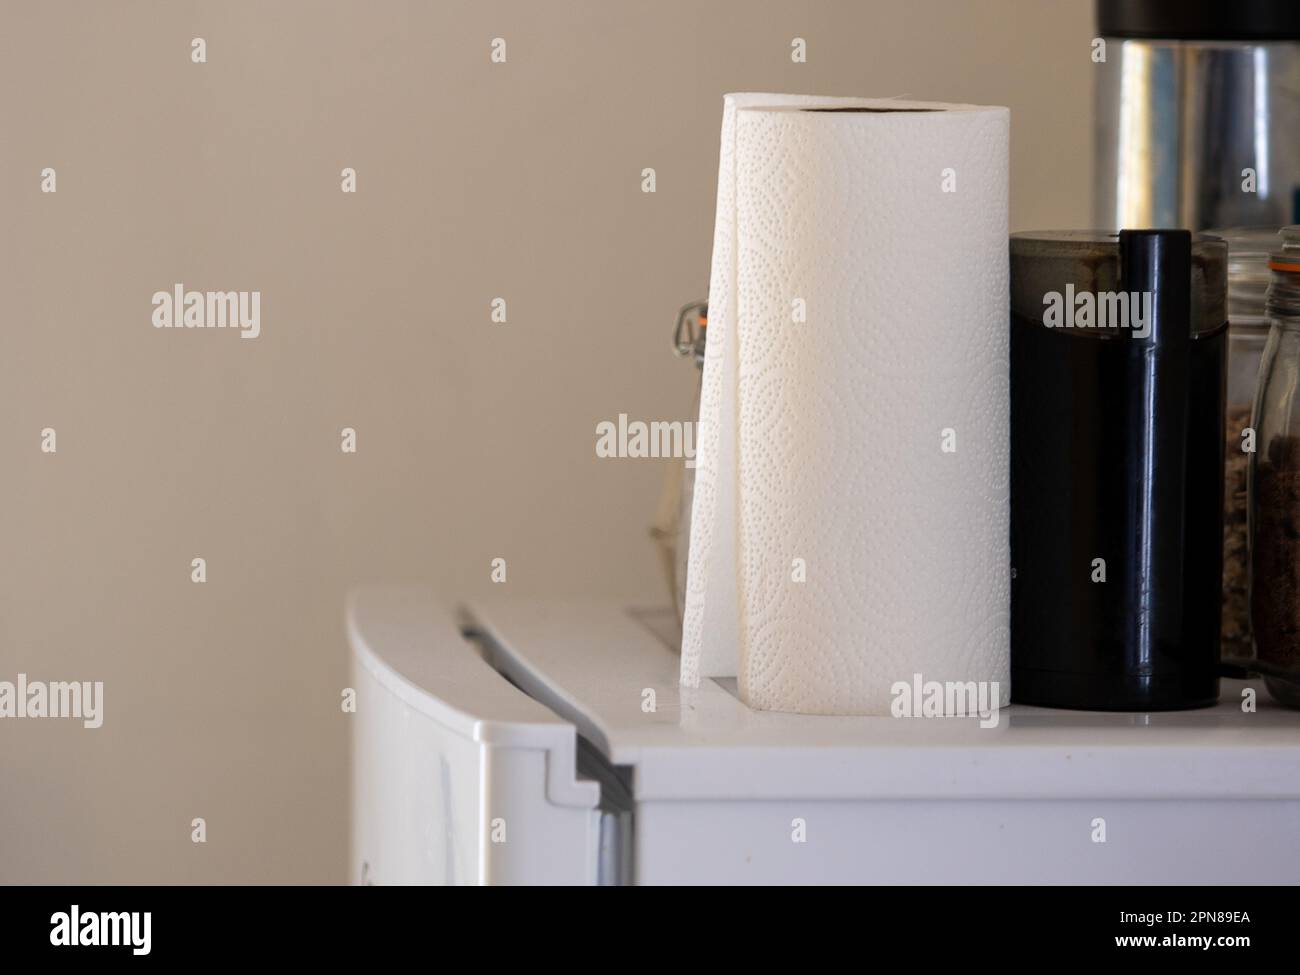 Items kept on top of a fridge/freezer including a roll of kitchen paper towel and an electric coffee grinder Stock Photo